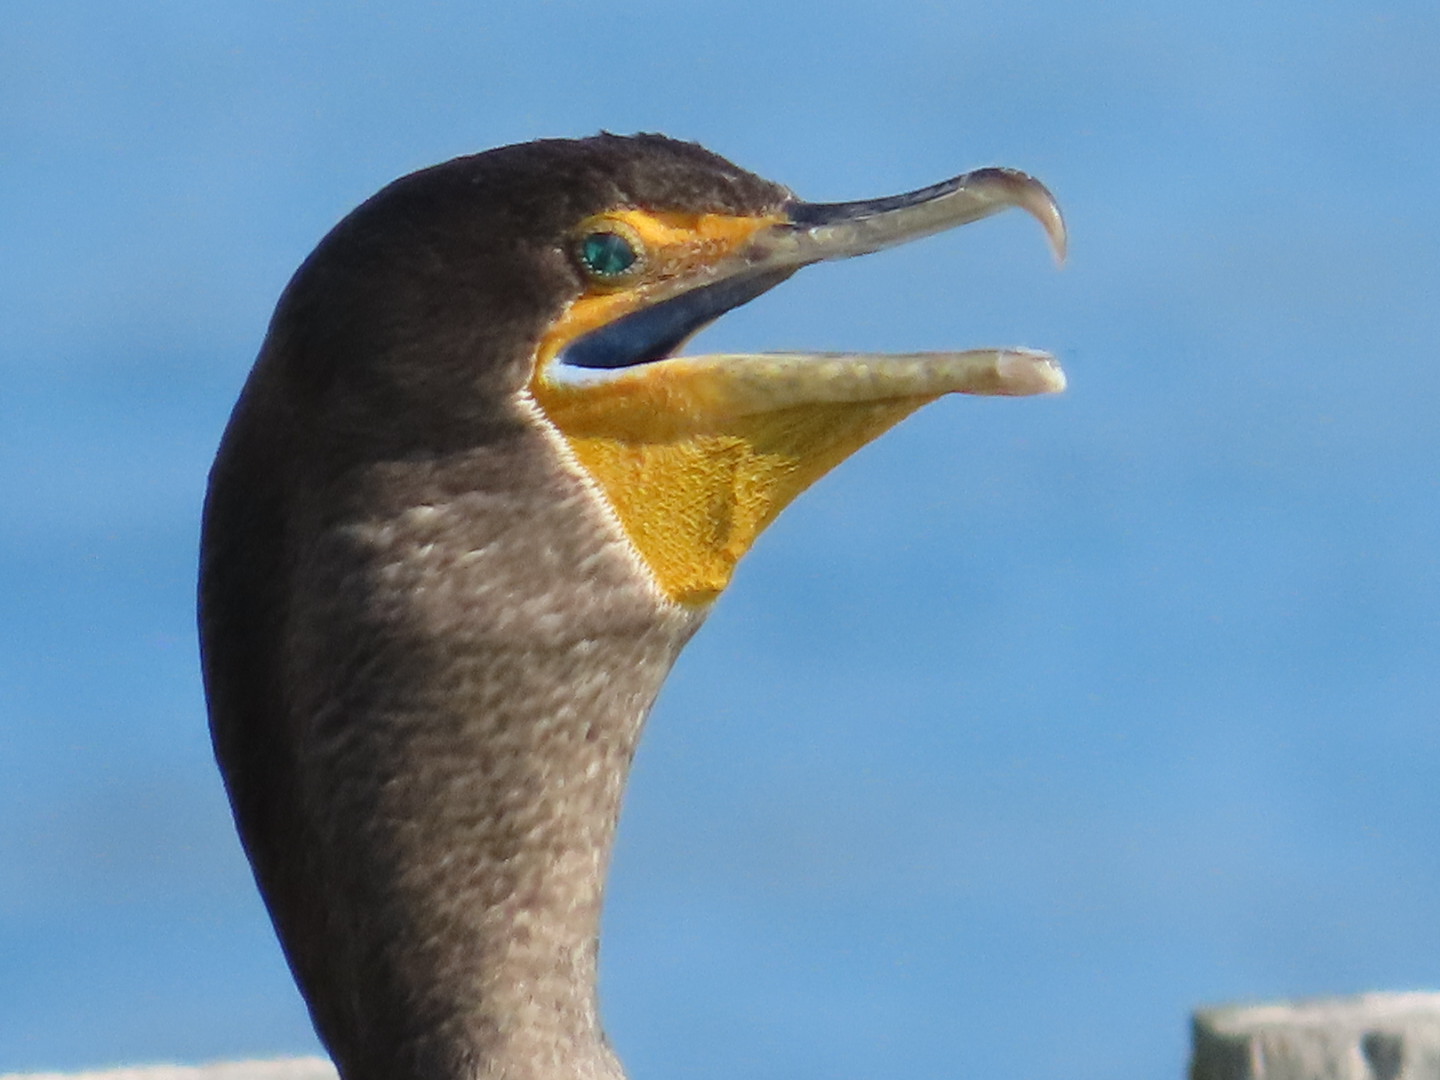 Cormorant seen with mouth open with blue ocean water as background